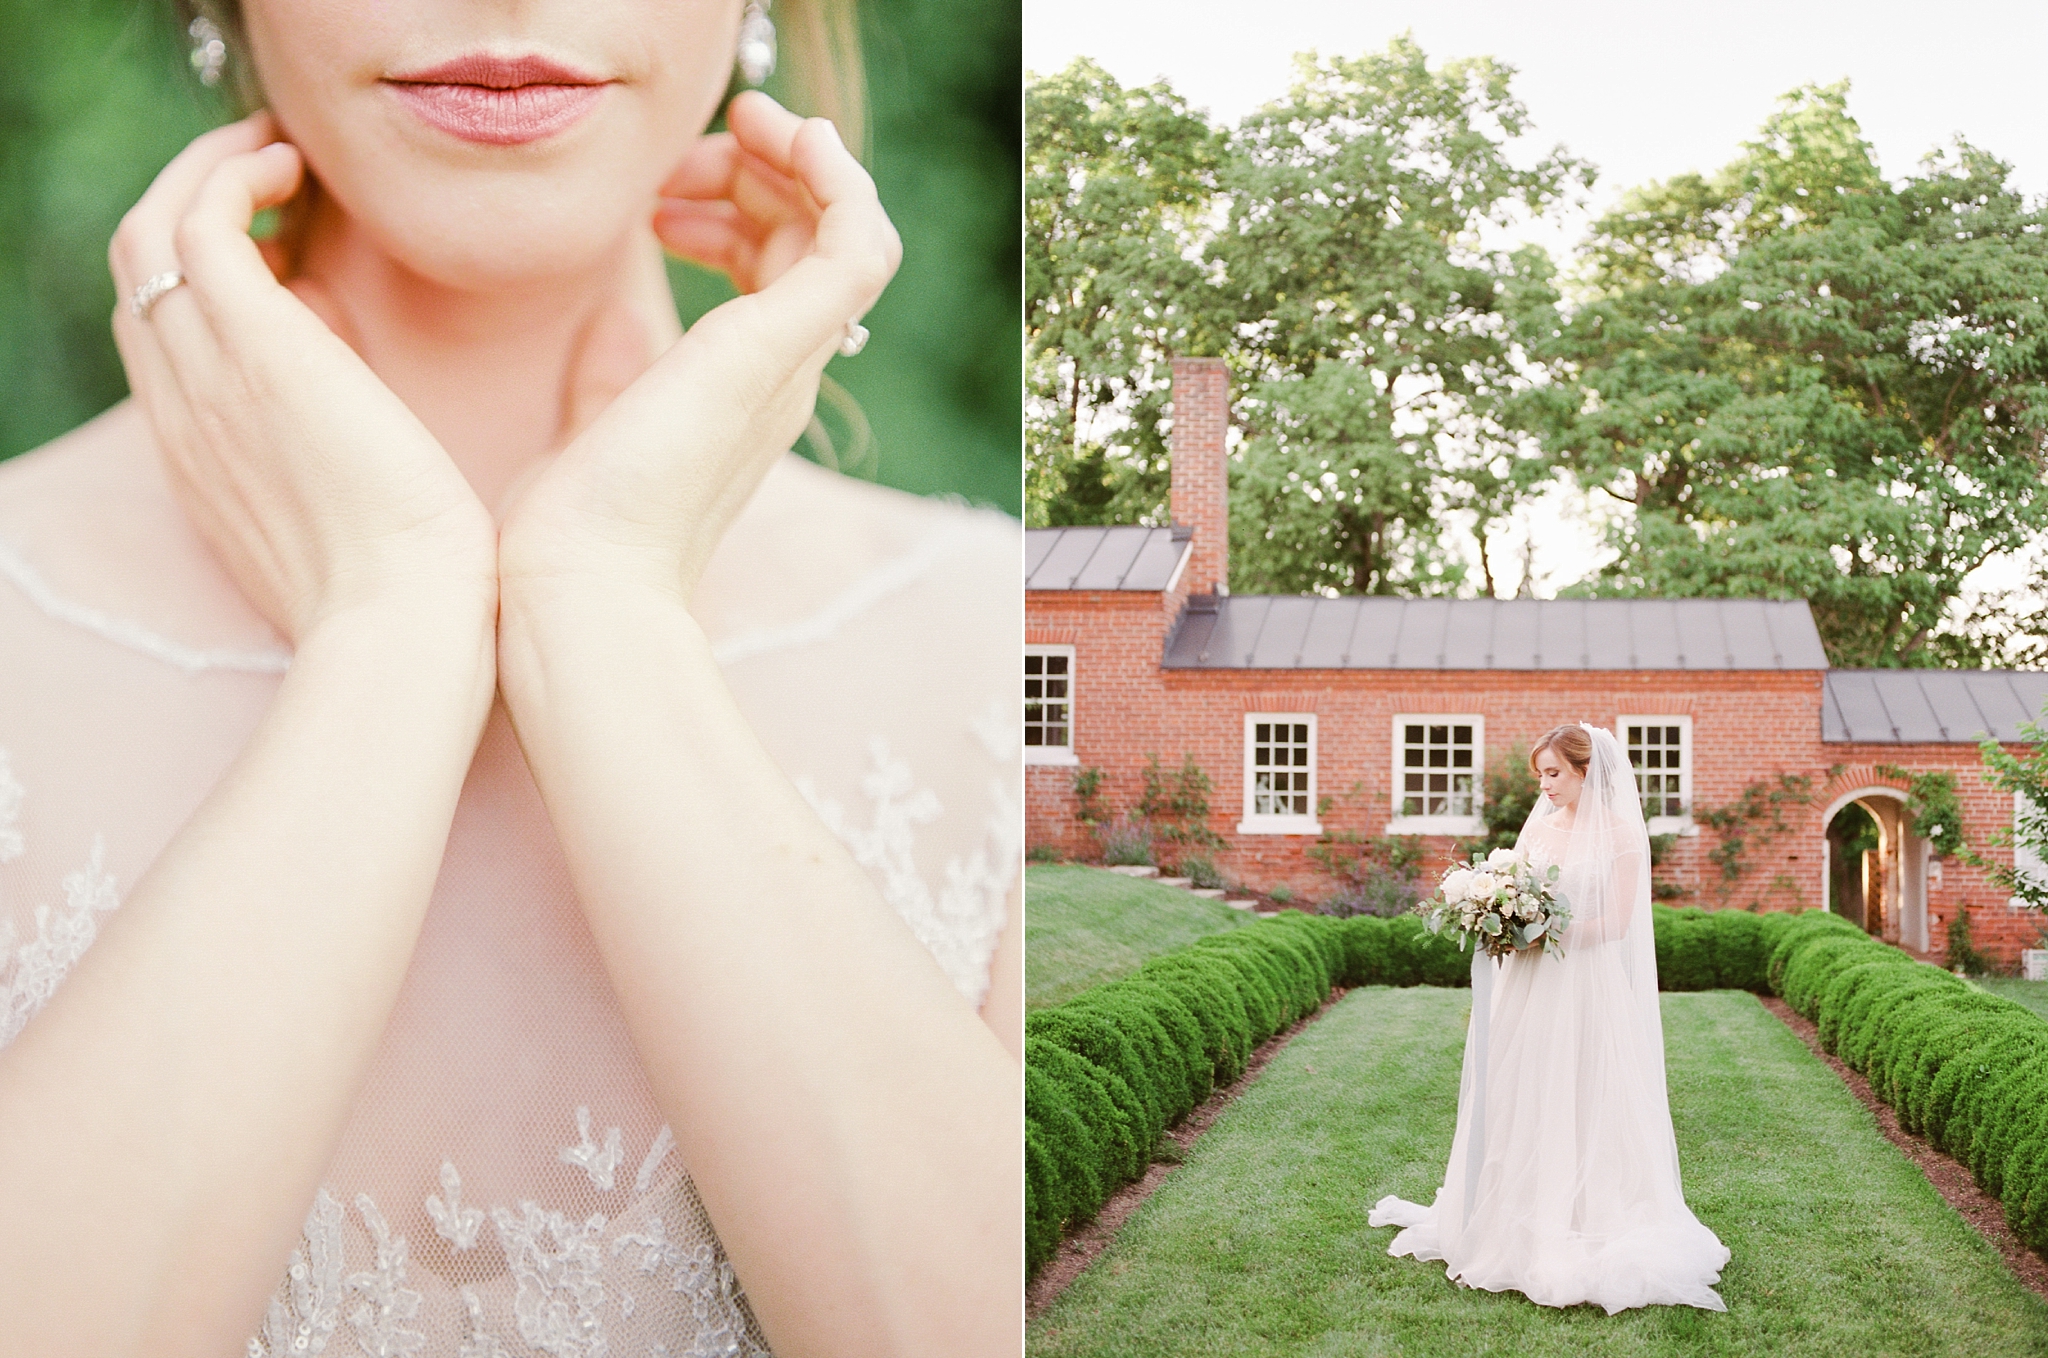 Classic and timeless bridal portraits are captured by Washington, DC fine art wedding photographer, Alicia Lacey at Oatlands Plantation in Leesburg, VA.